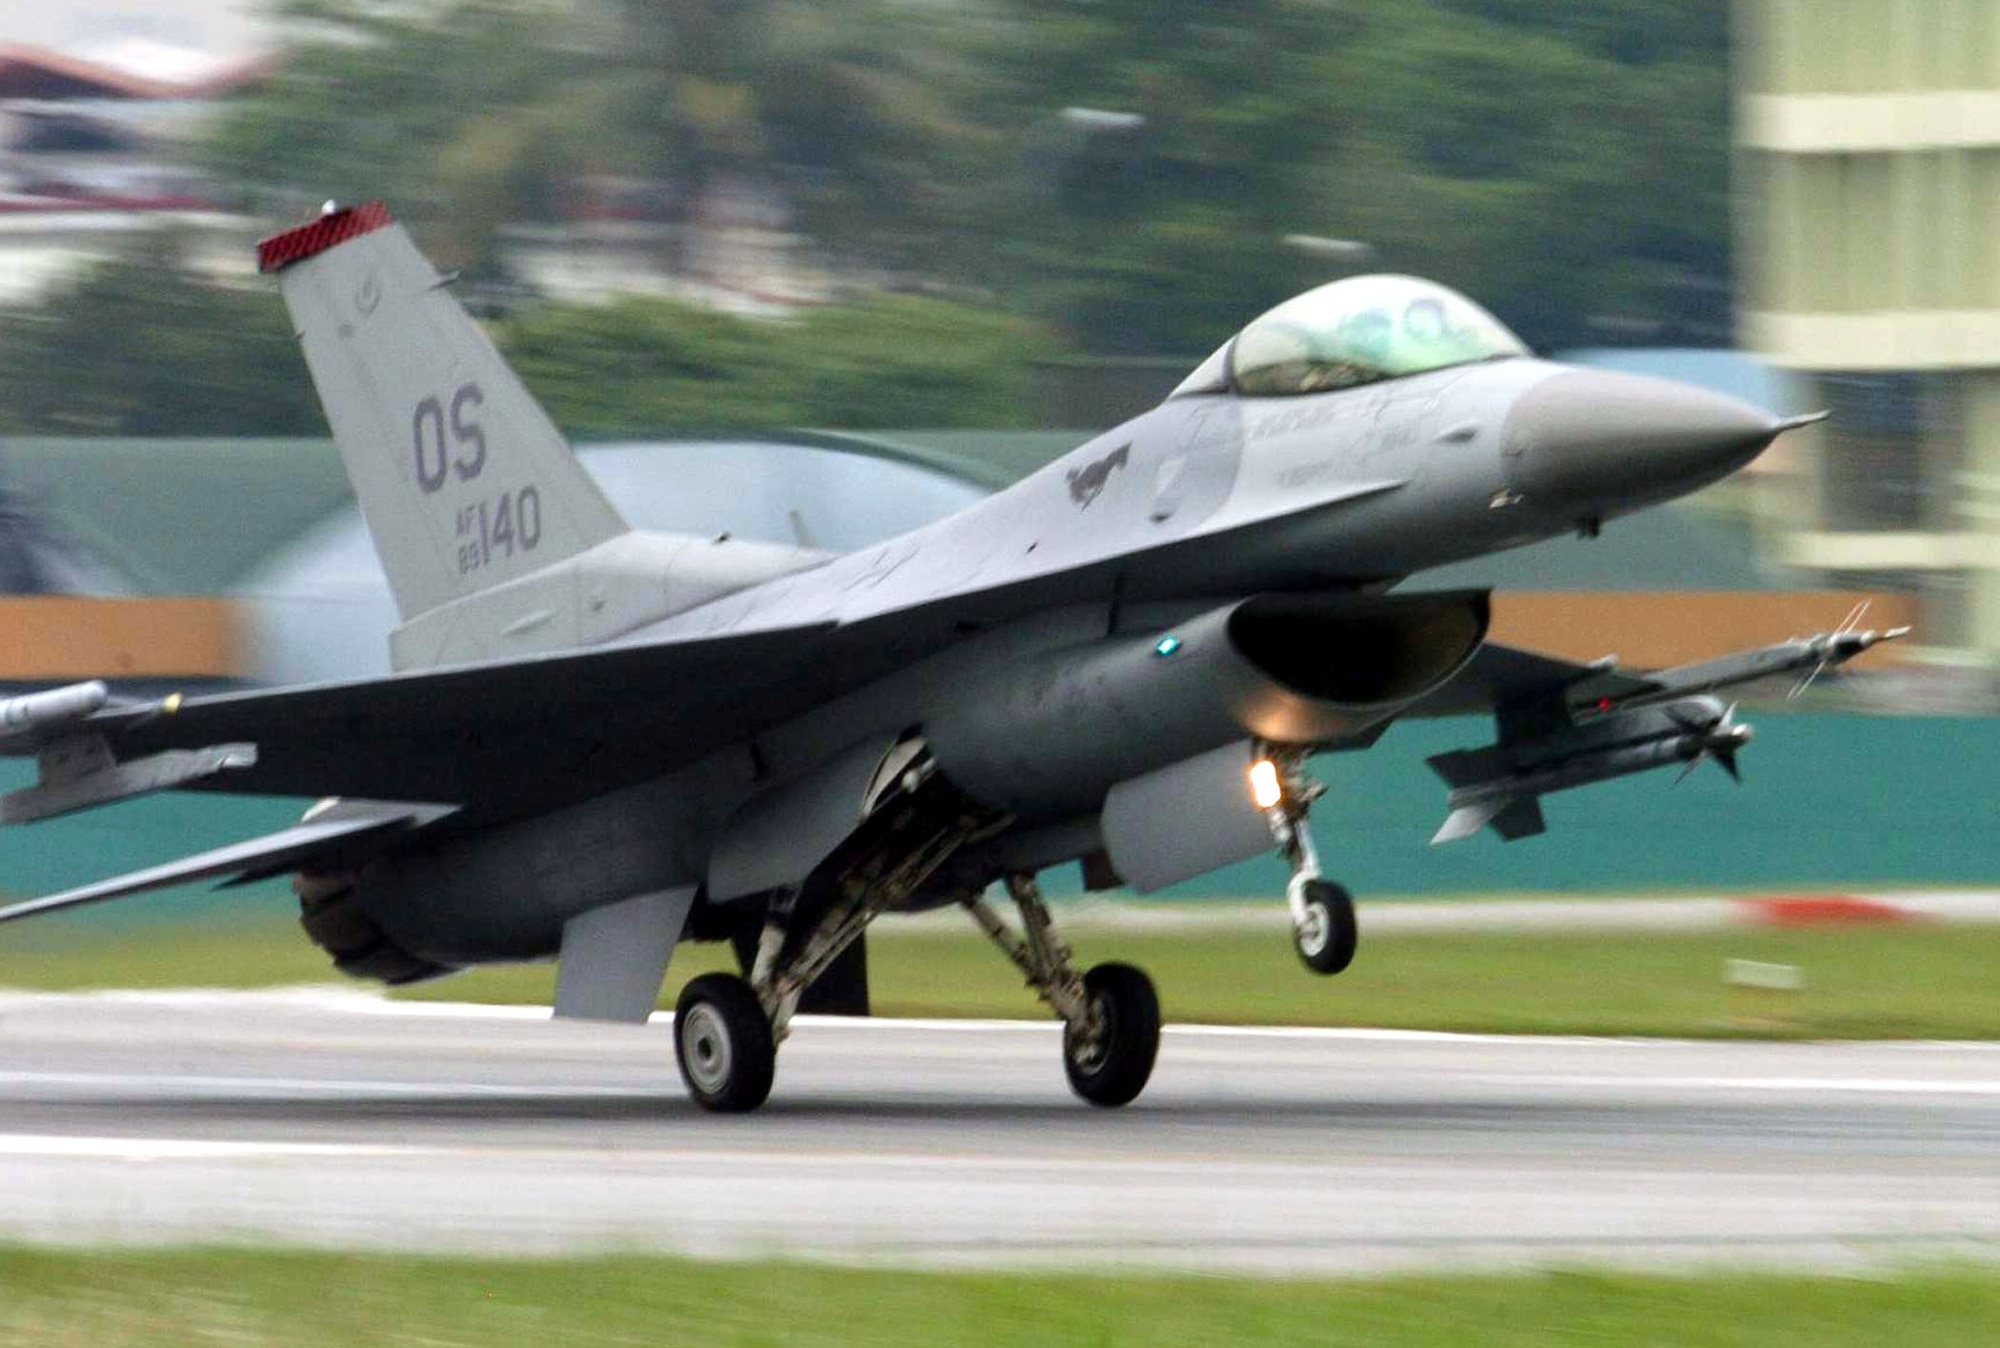 PAYA LEBAR AIR BASE, Singapore -- An F-16 Fighting Falcon from the 36th Fighter Squadron at Osan Air Base, South Korea, lands here after a mission during Commando Sling 04-3.  U.S. and Singaporean Airmen trained together using realistic dissimilar aircraft air-to-air combat tactics.  (U.S. Air Force photo by Master Sgt. Val Gempis)